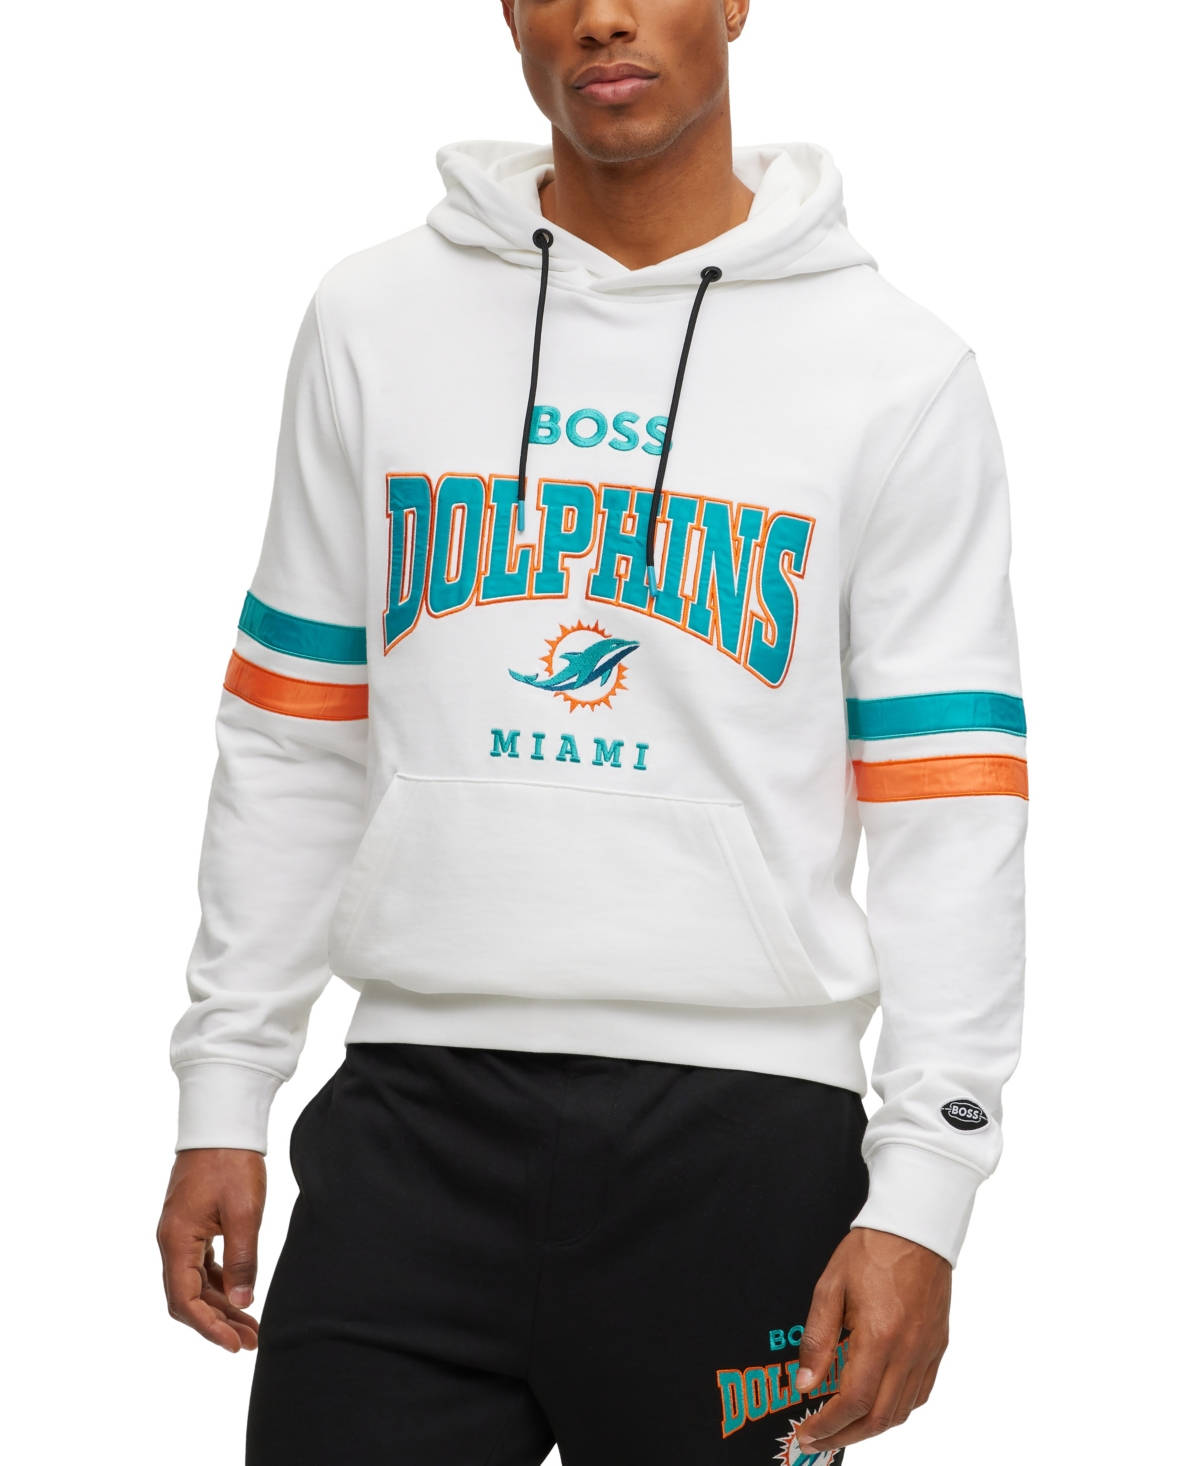 Boss launches sportswear capsule with NFL players